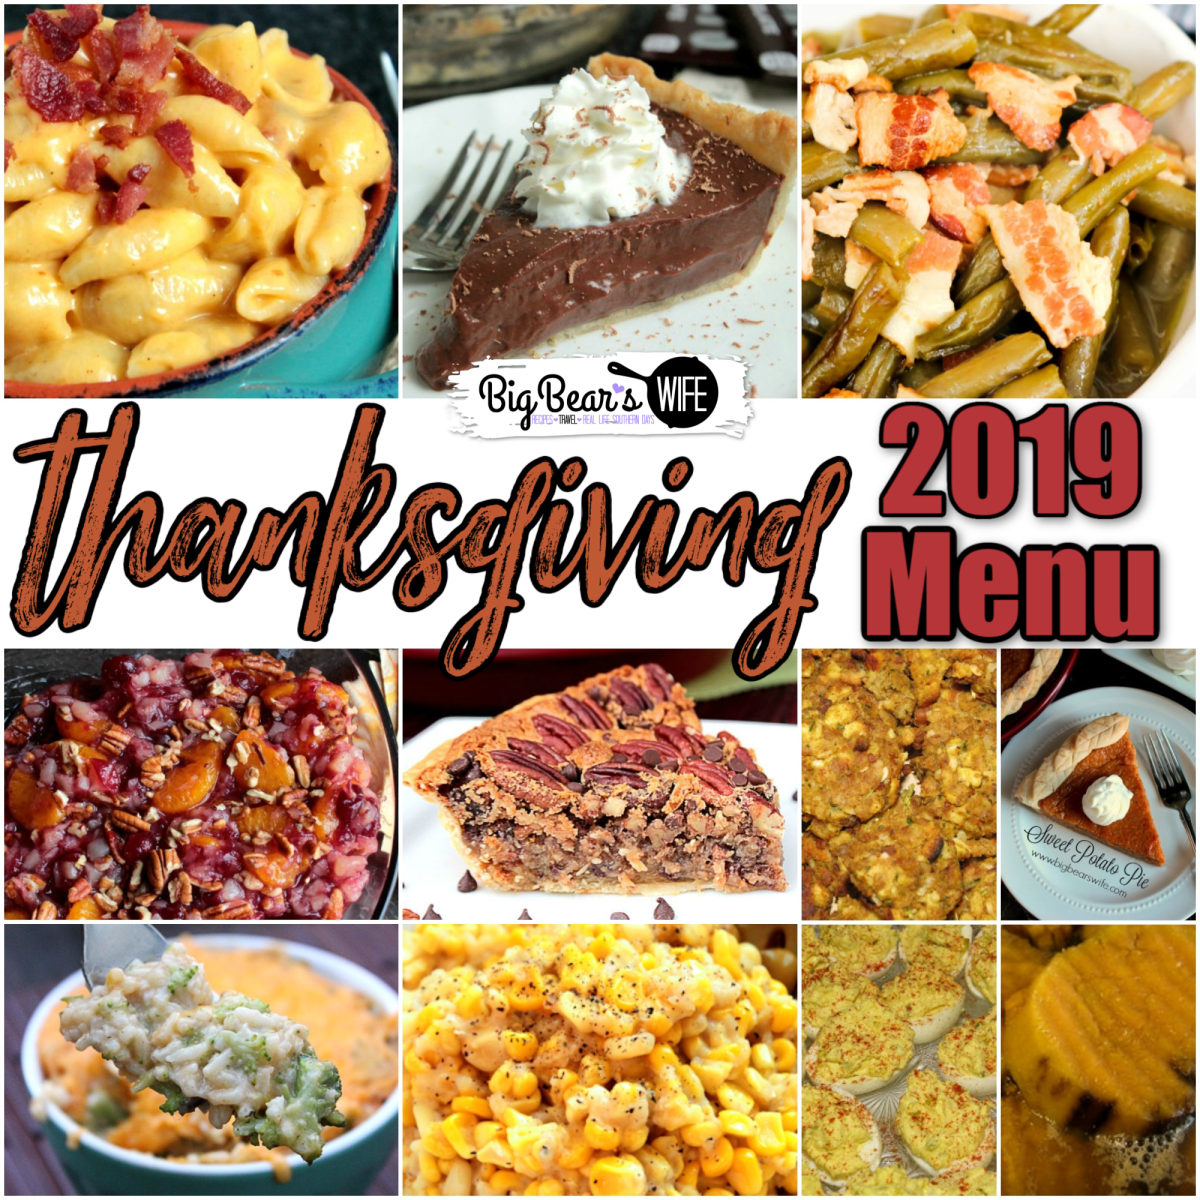 Thanksgiving Menu - We've got our 2019 Thanksgiving Menu planned out and ready to go! Need some ideas? This is what we're having... via @bigbearswife